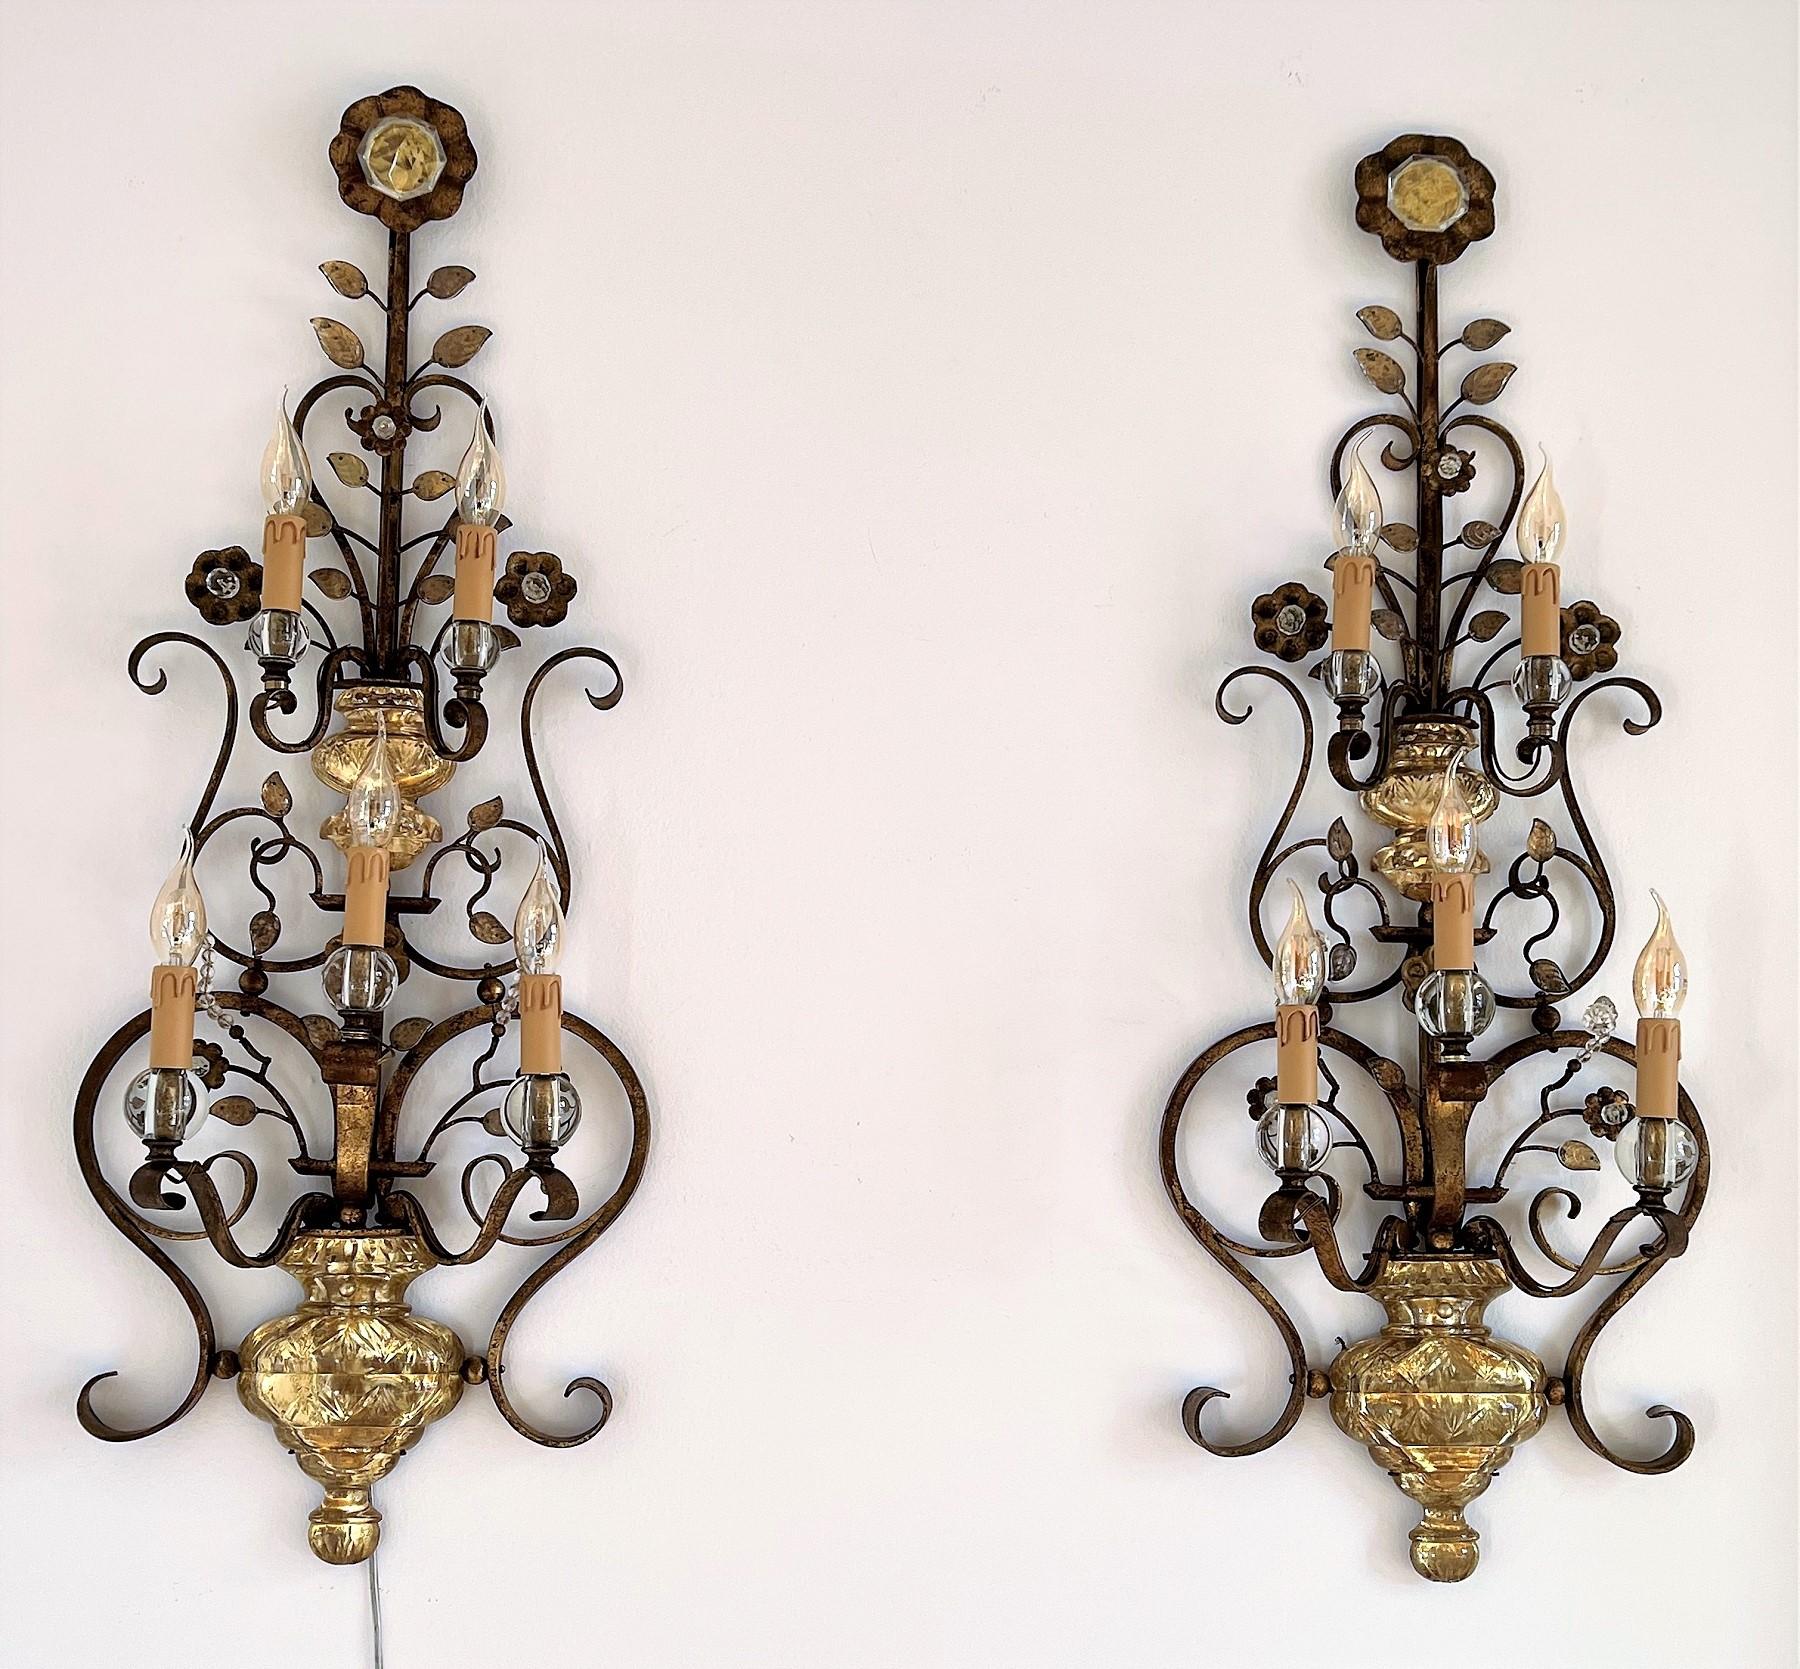 A magnificent pair of extra large rare Florentine wall lights handcrafted expertly in the form of a flower pot with climbing flowers. 
Handcrafted one by one from artisan company Banci of Florence, Italy, in the 1960s. 
The base material is gilt